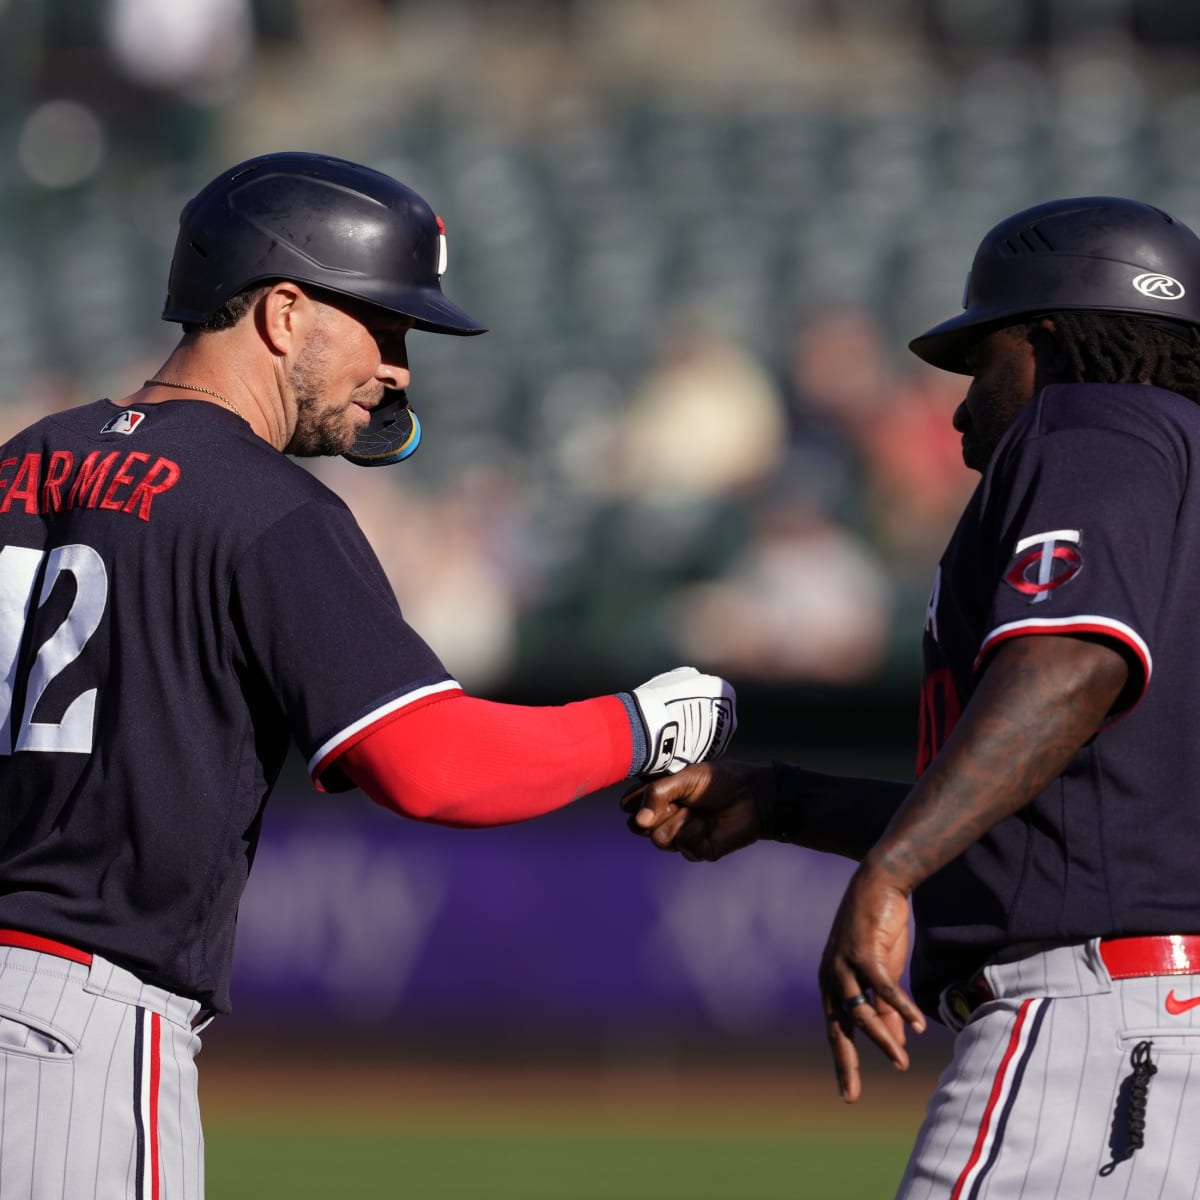 Taylor drives in all 3 runs as Twins snap skid, beat Jays in 10 innings  National News - Bally Sports